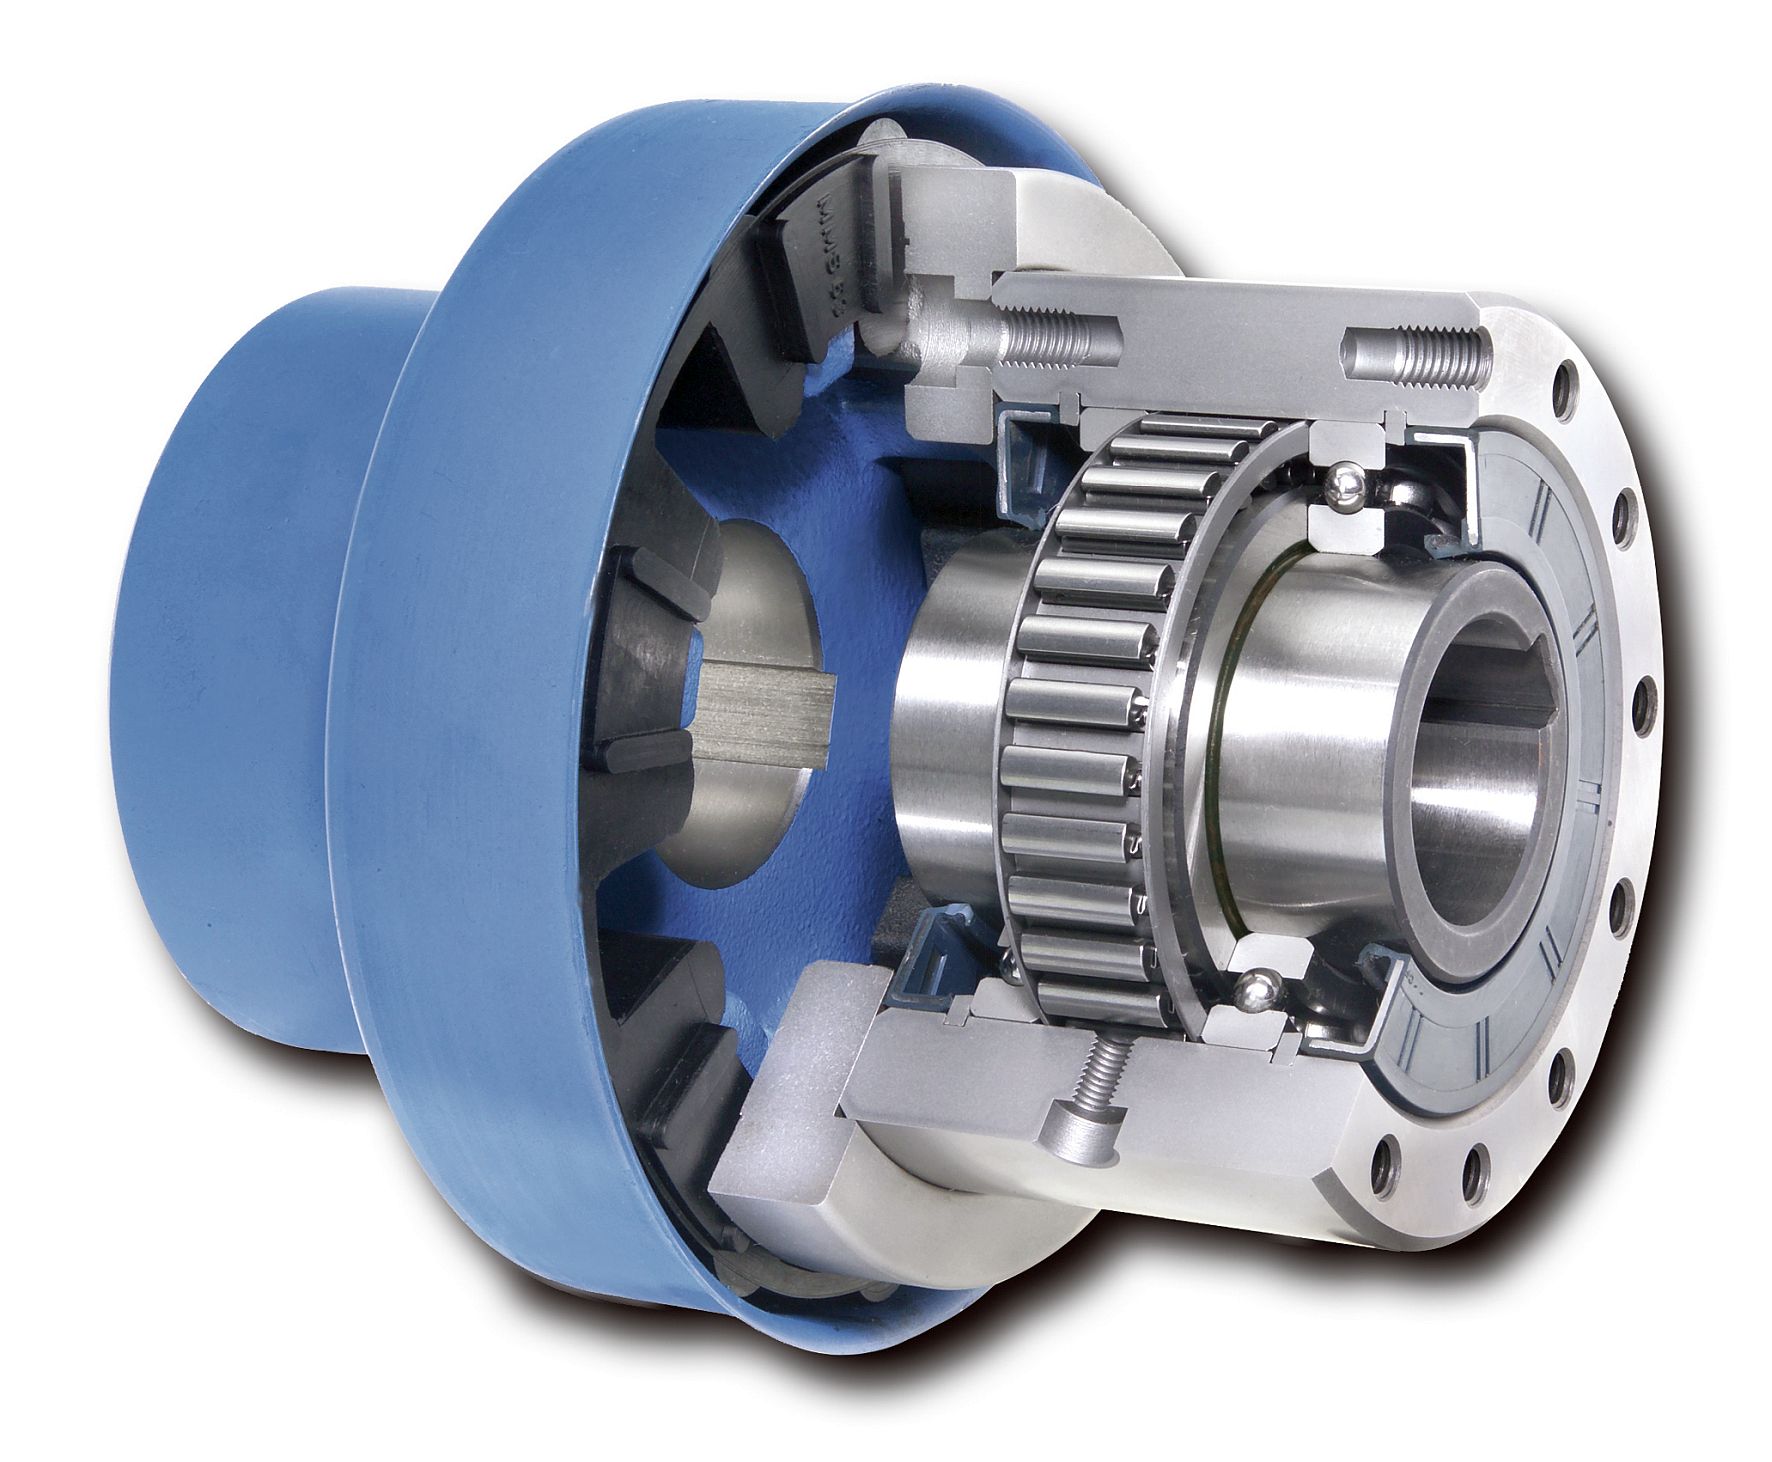 complete freewheels FBE and FBL from RINGSPANN